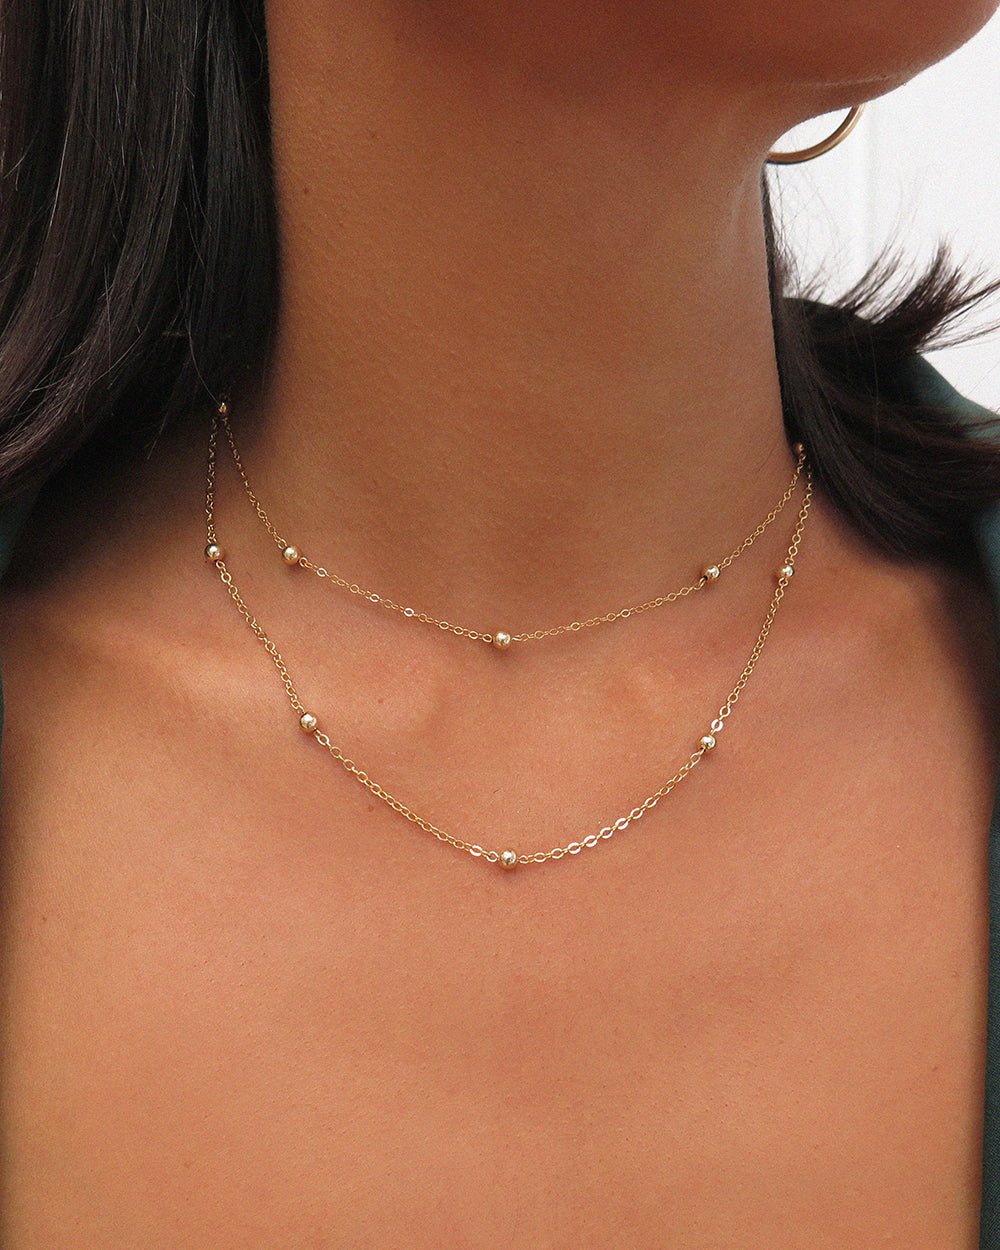 The Littl FIVE BEAD NECKLACE